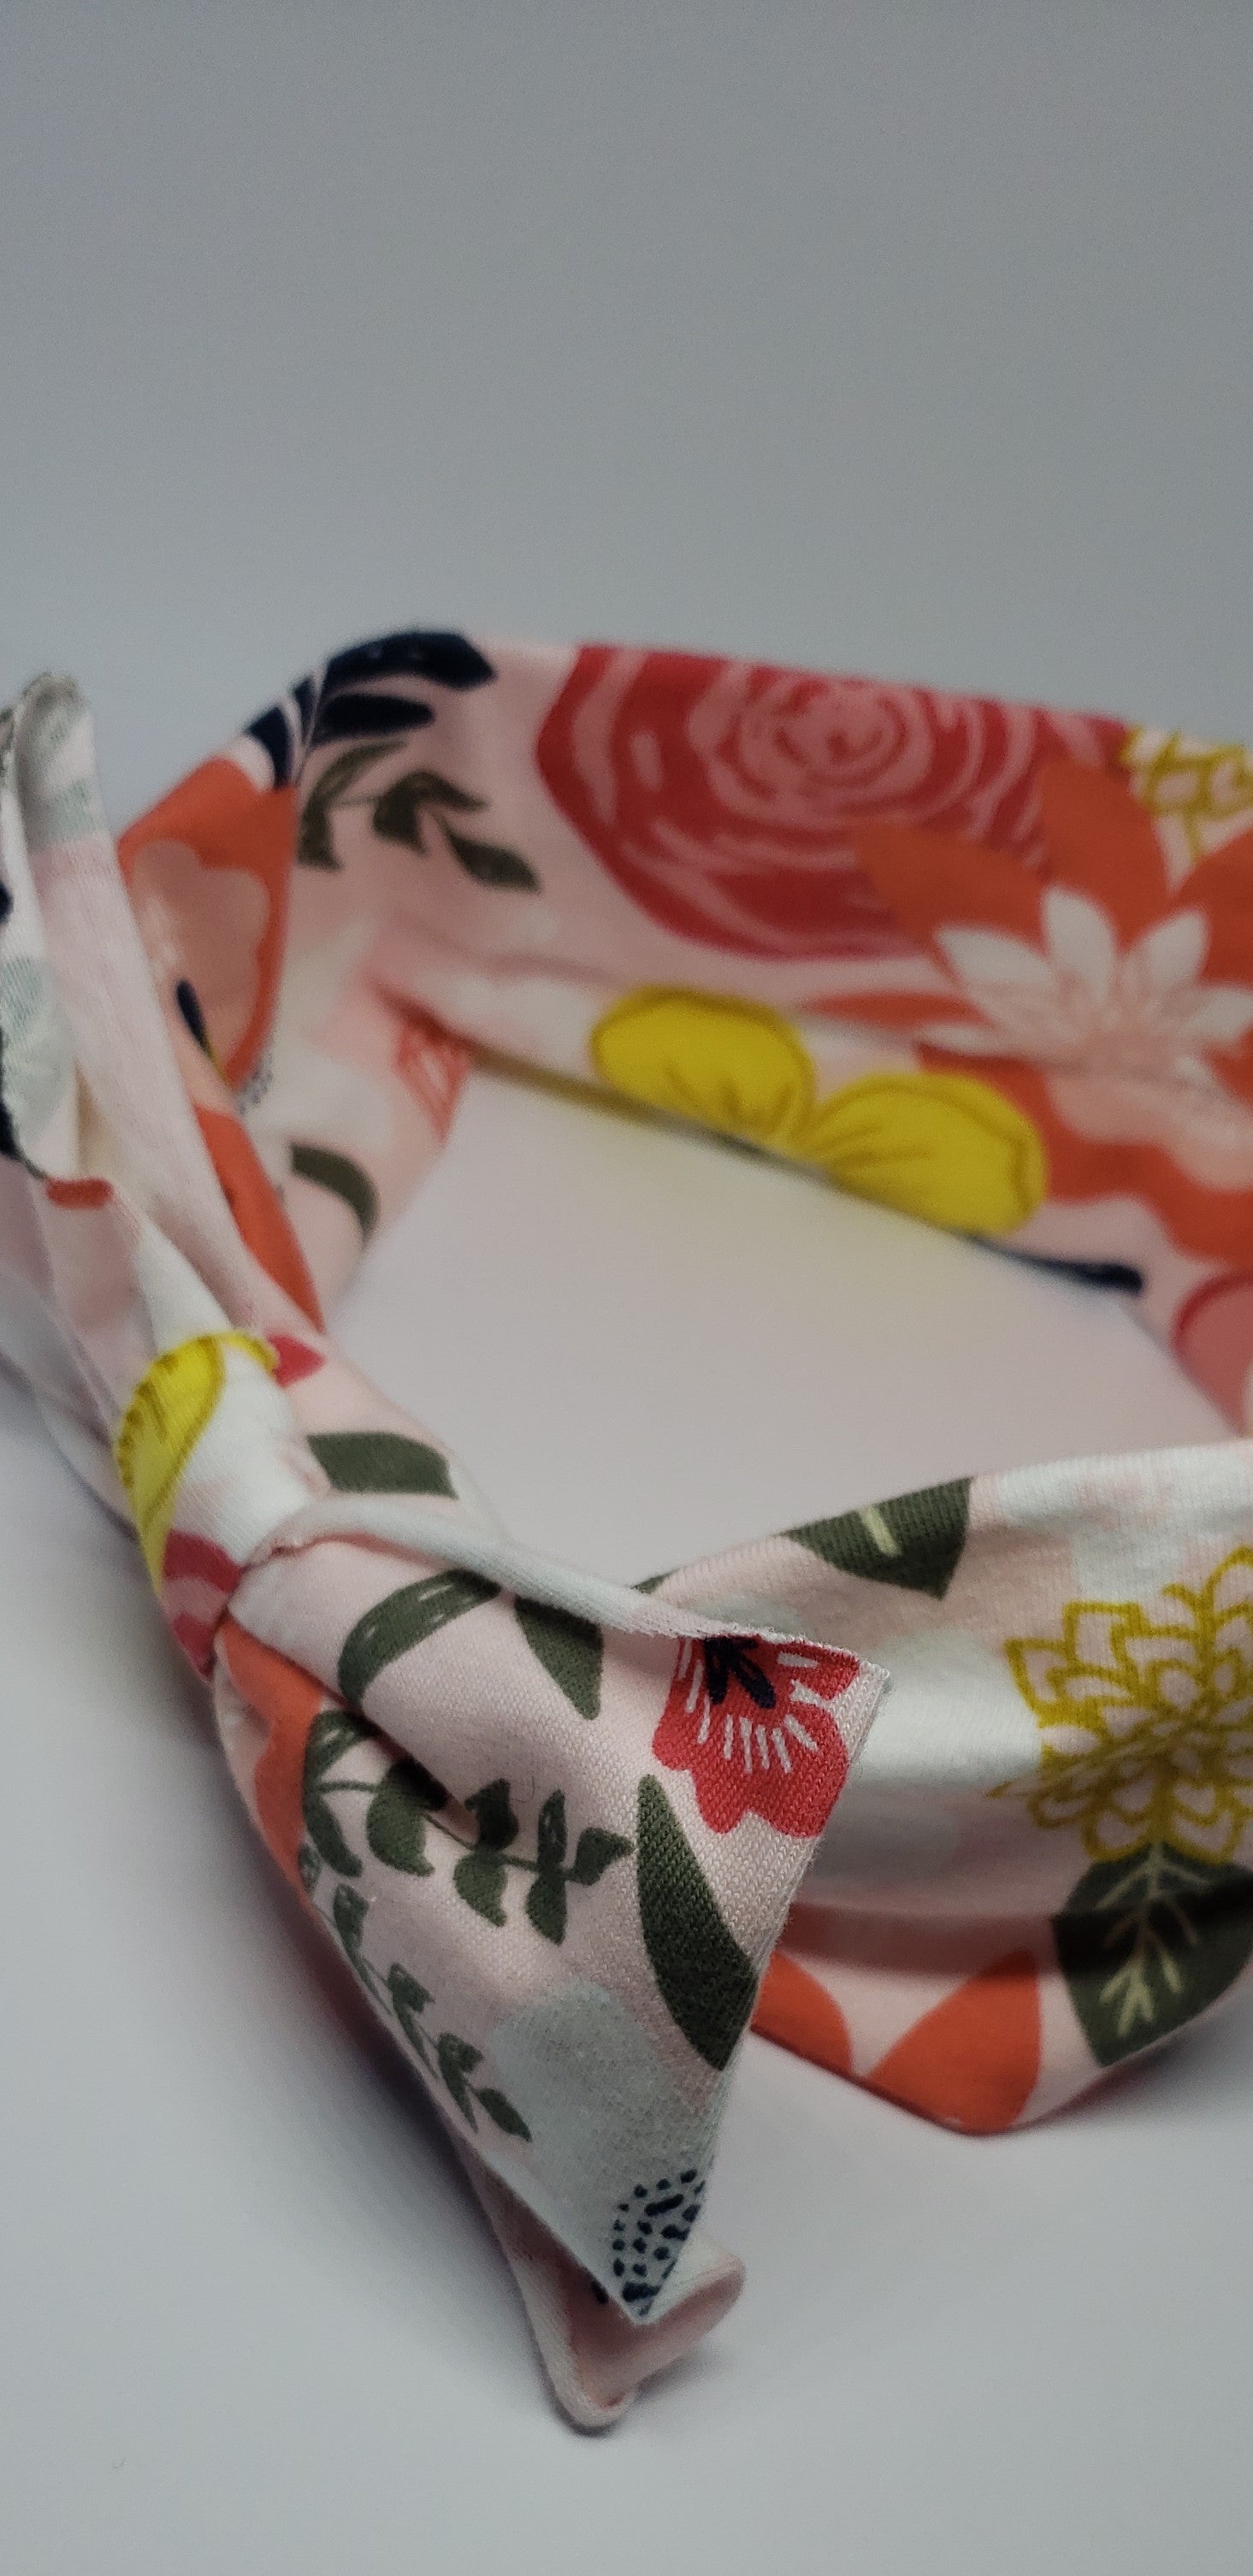 Mila Tropical Twist Pink on Pink Floral Headband - Houzz of DVA Boutique